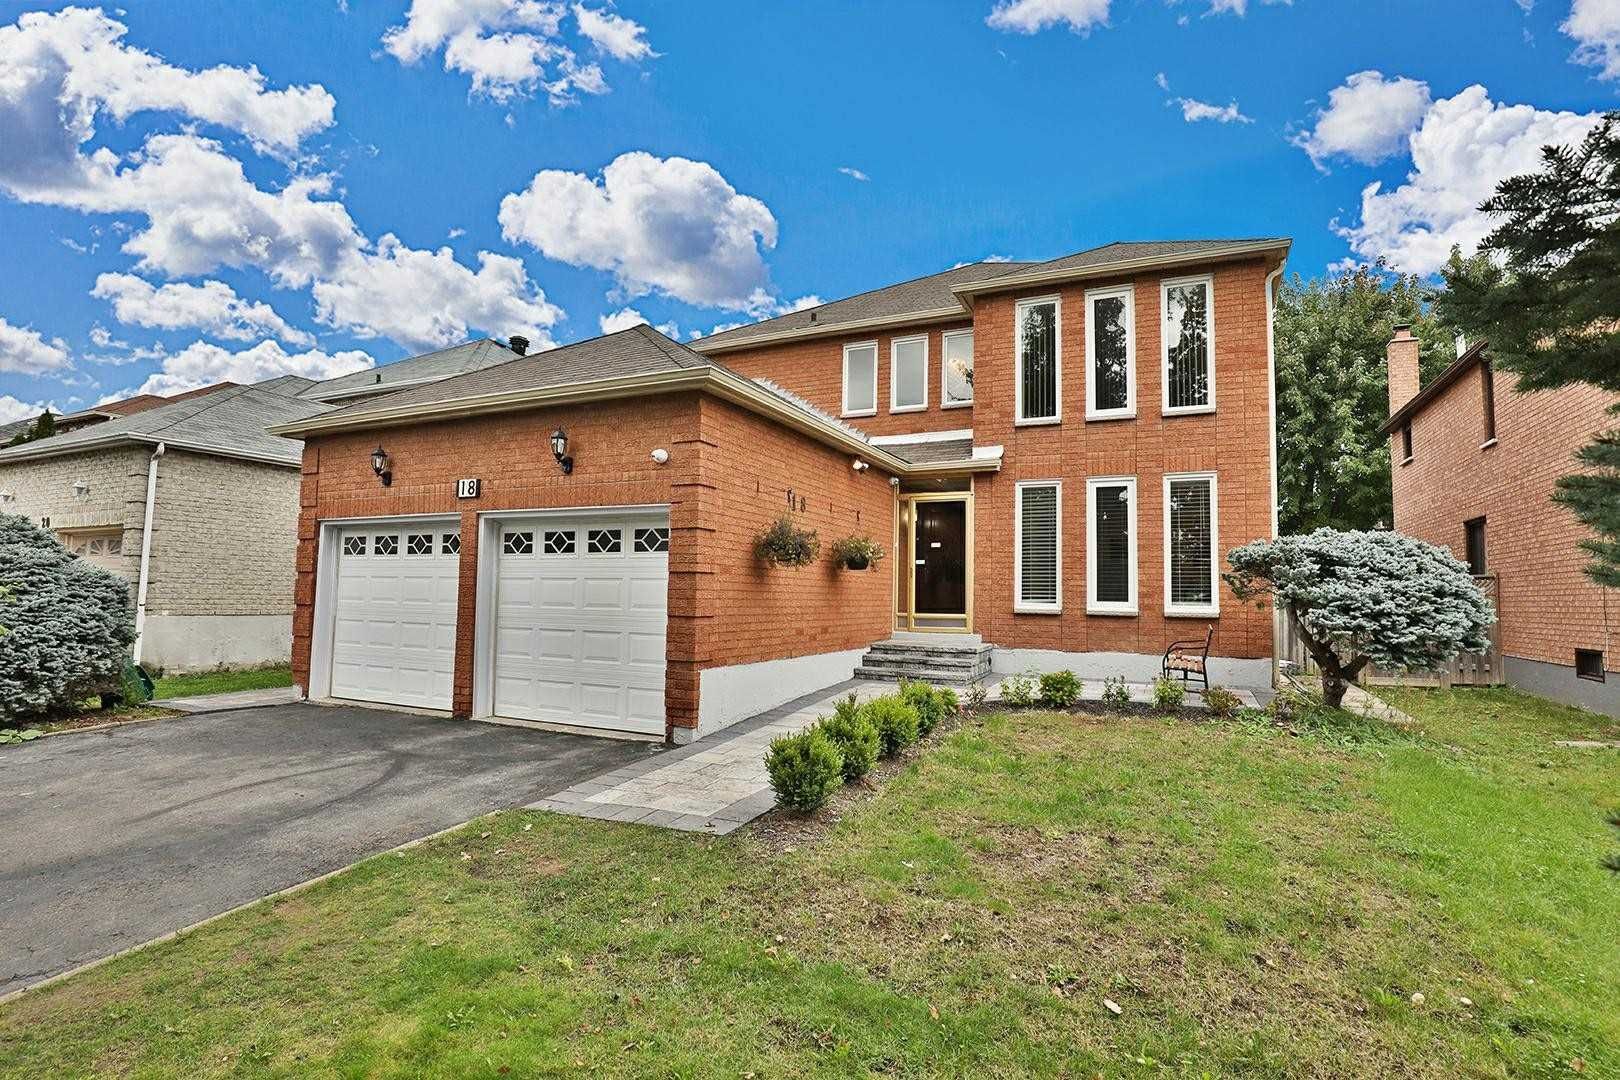 Main Photo: 18 Taplane Drive in Markham: Middlefield House (2-Storey) for sale : MLS®# N5404903